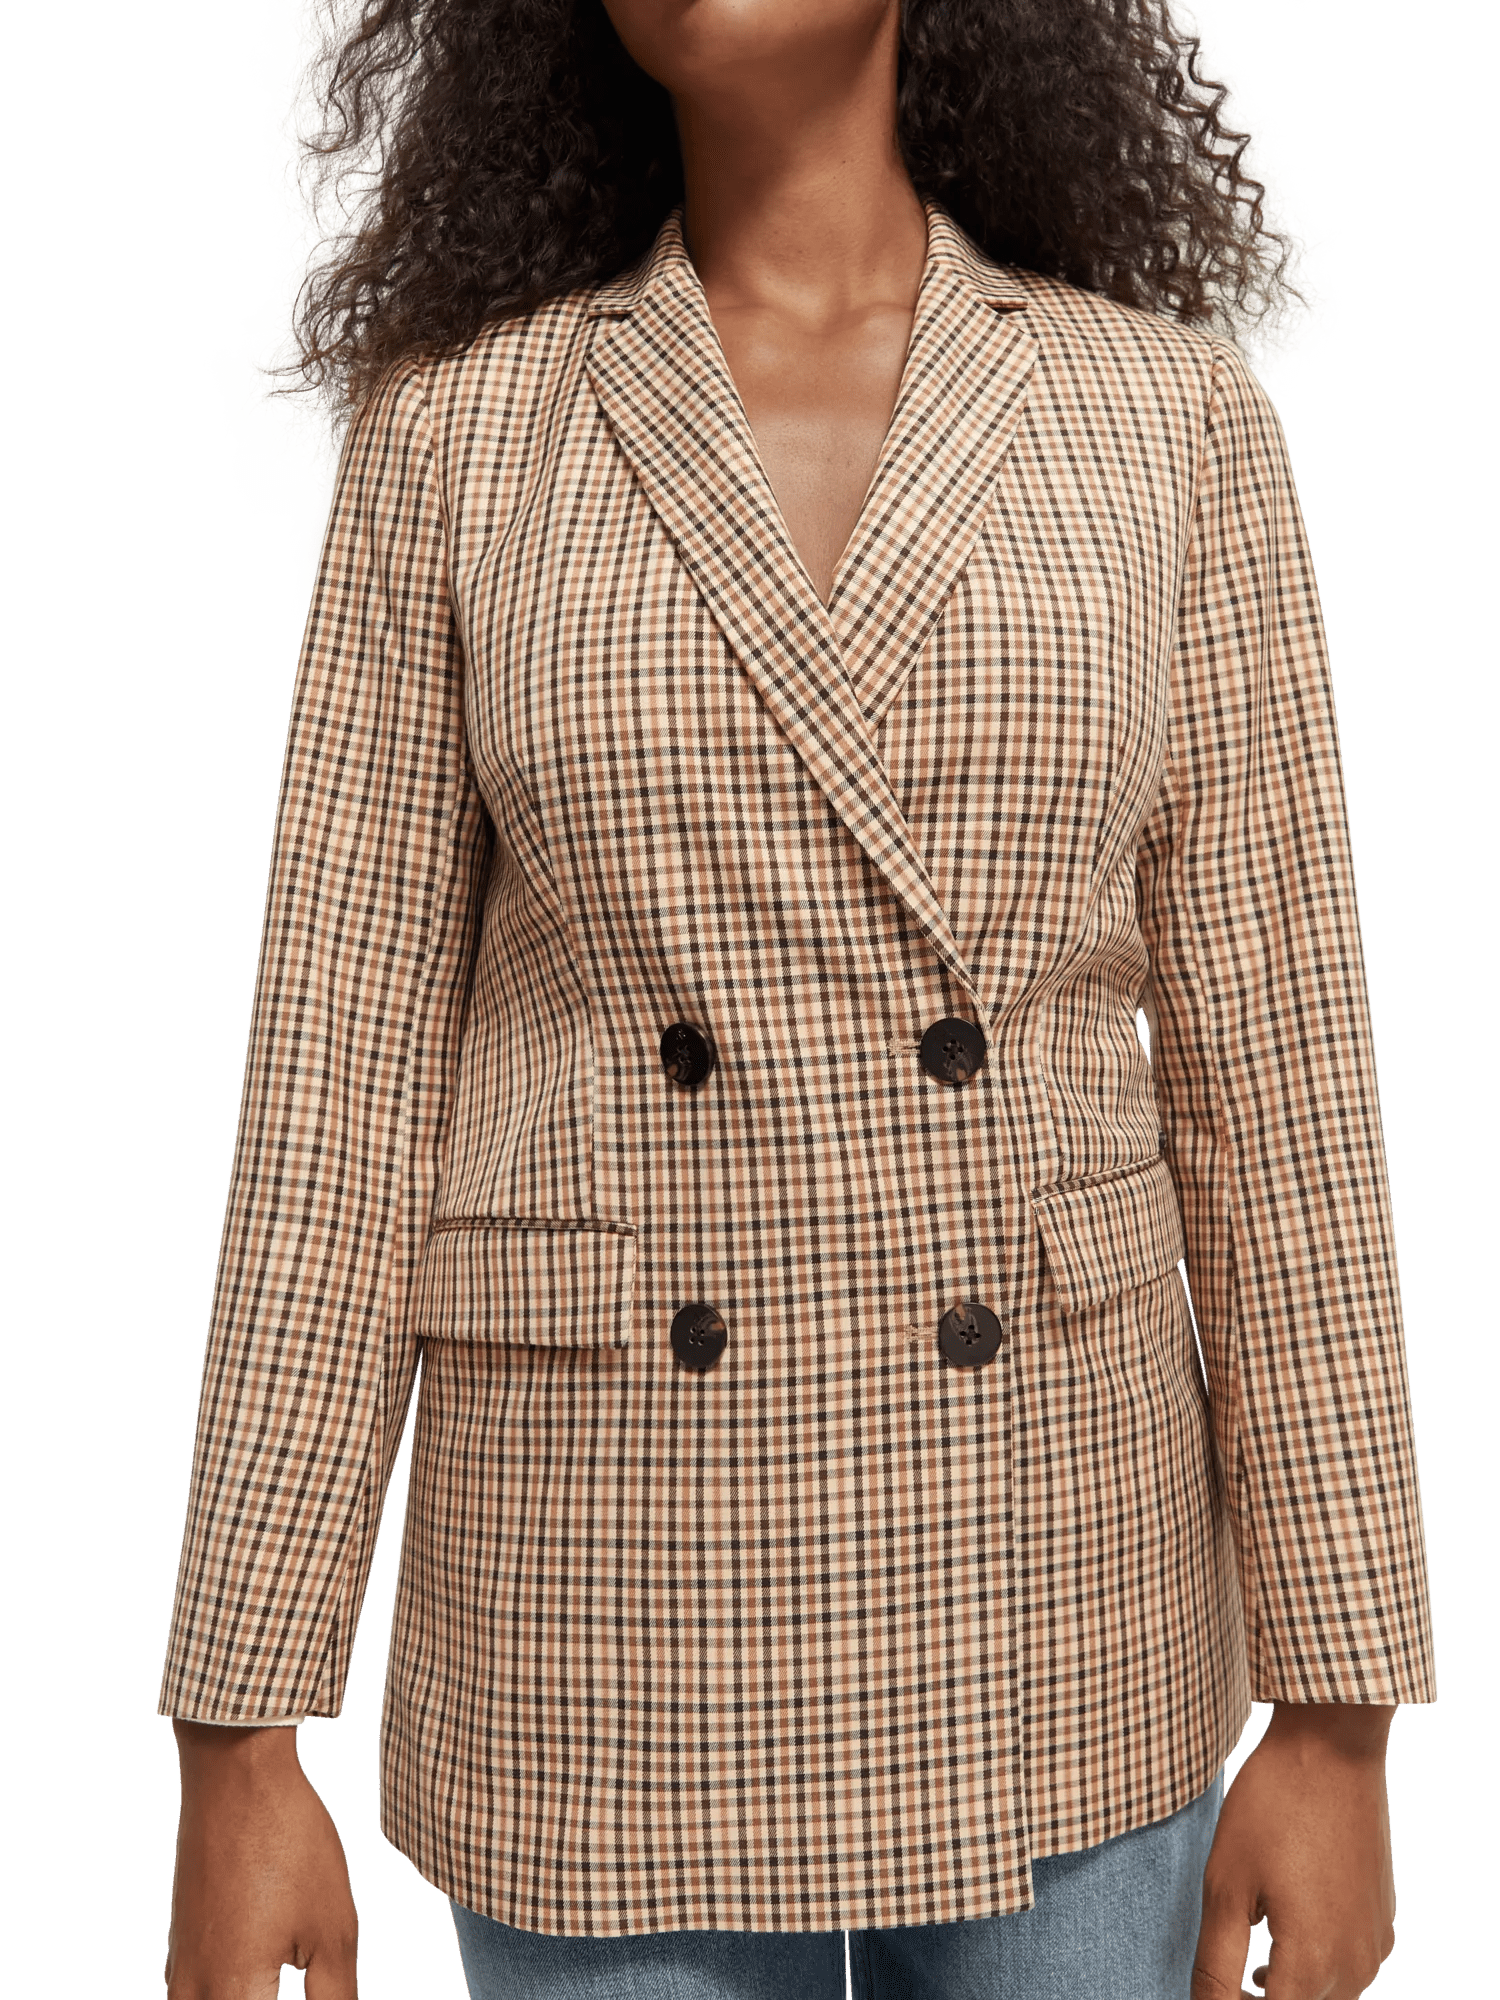 Brown Houndstooth Double Breasted Blazer